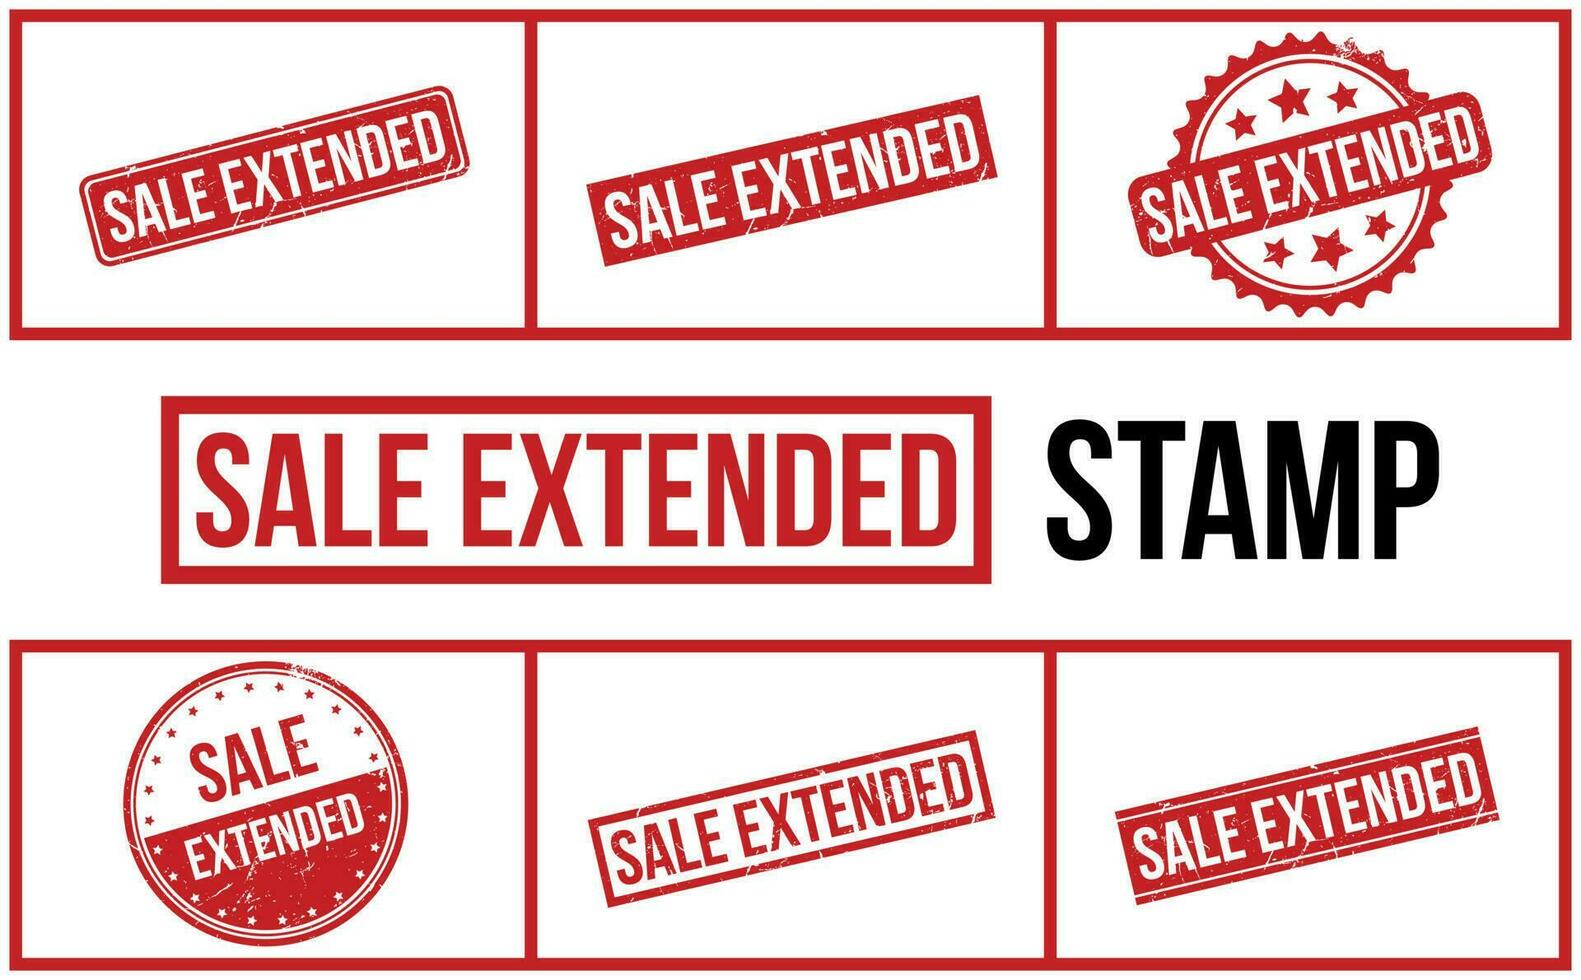 Sale Extended Rubber Stamp Set Vector